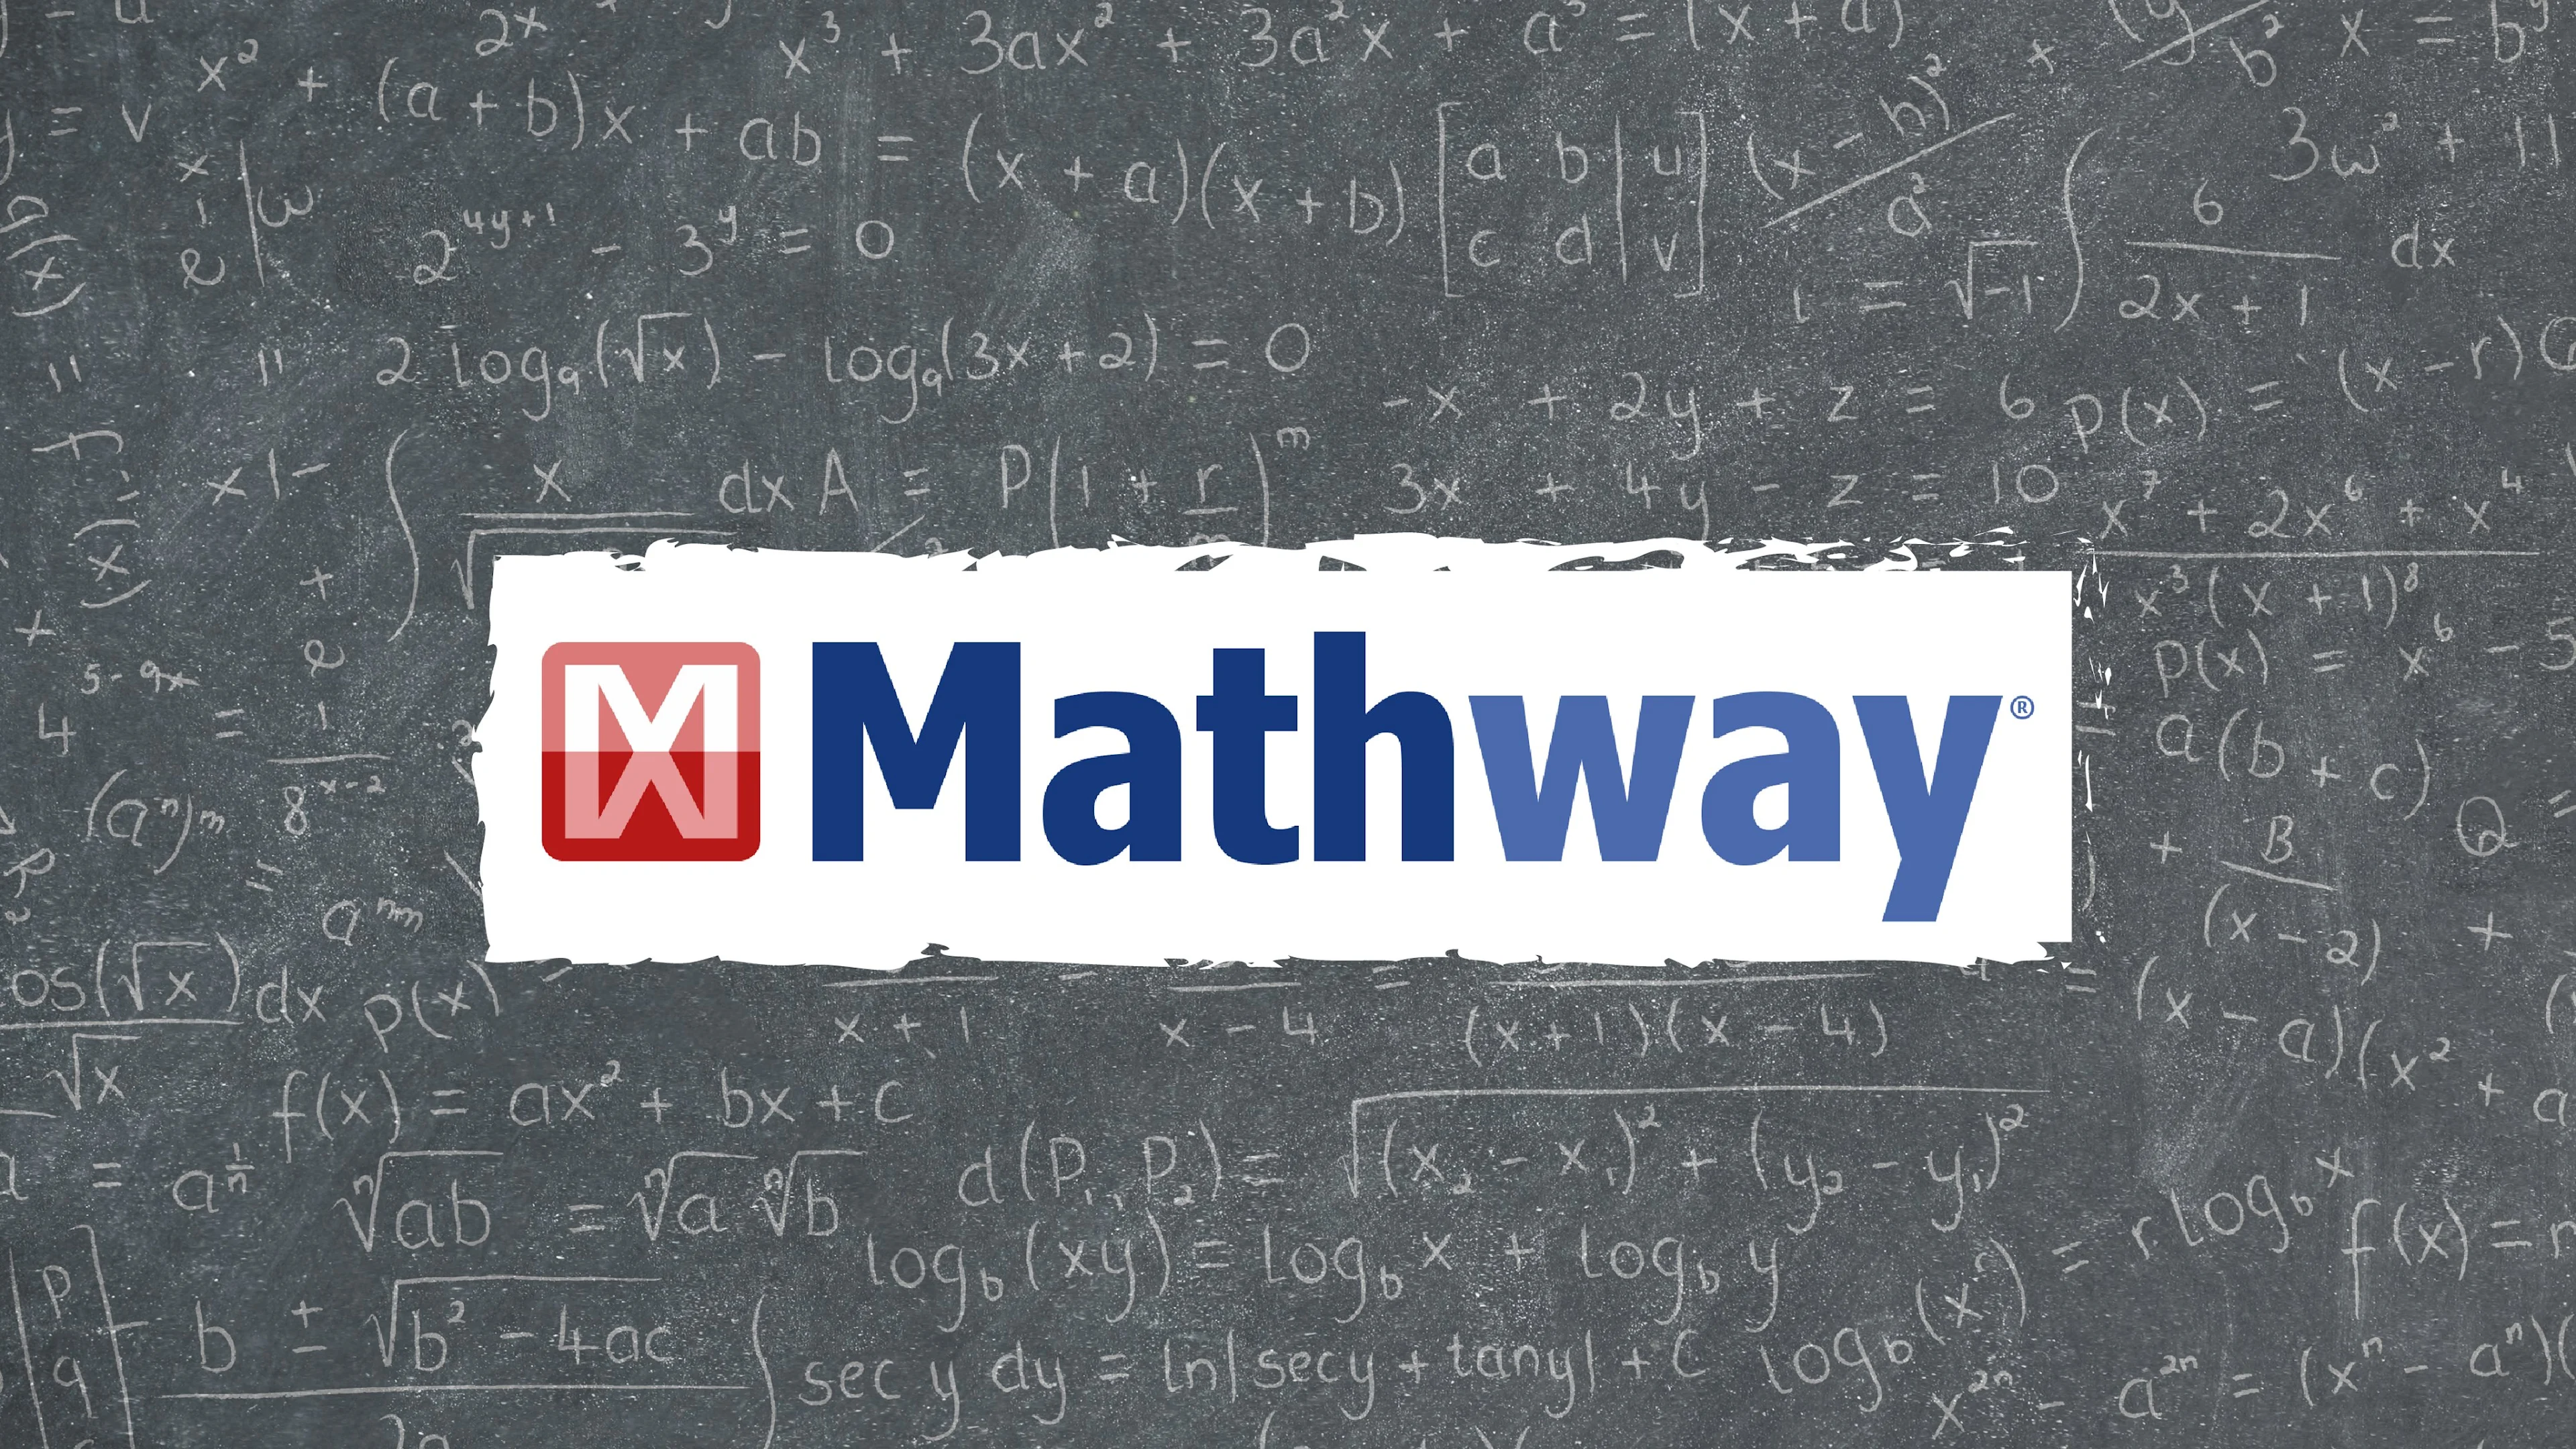 Android Apps by Mathway on Google Play